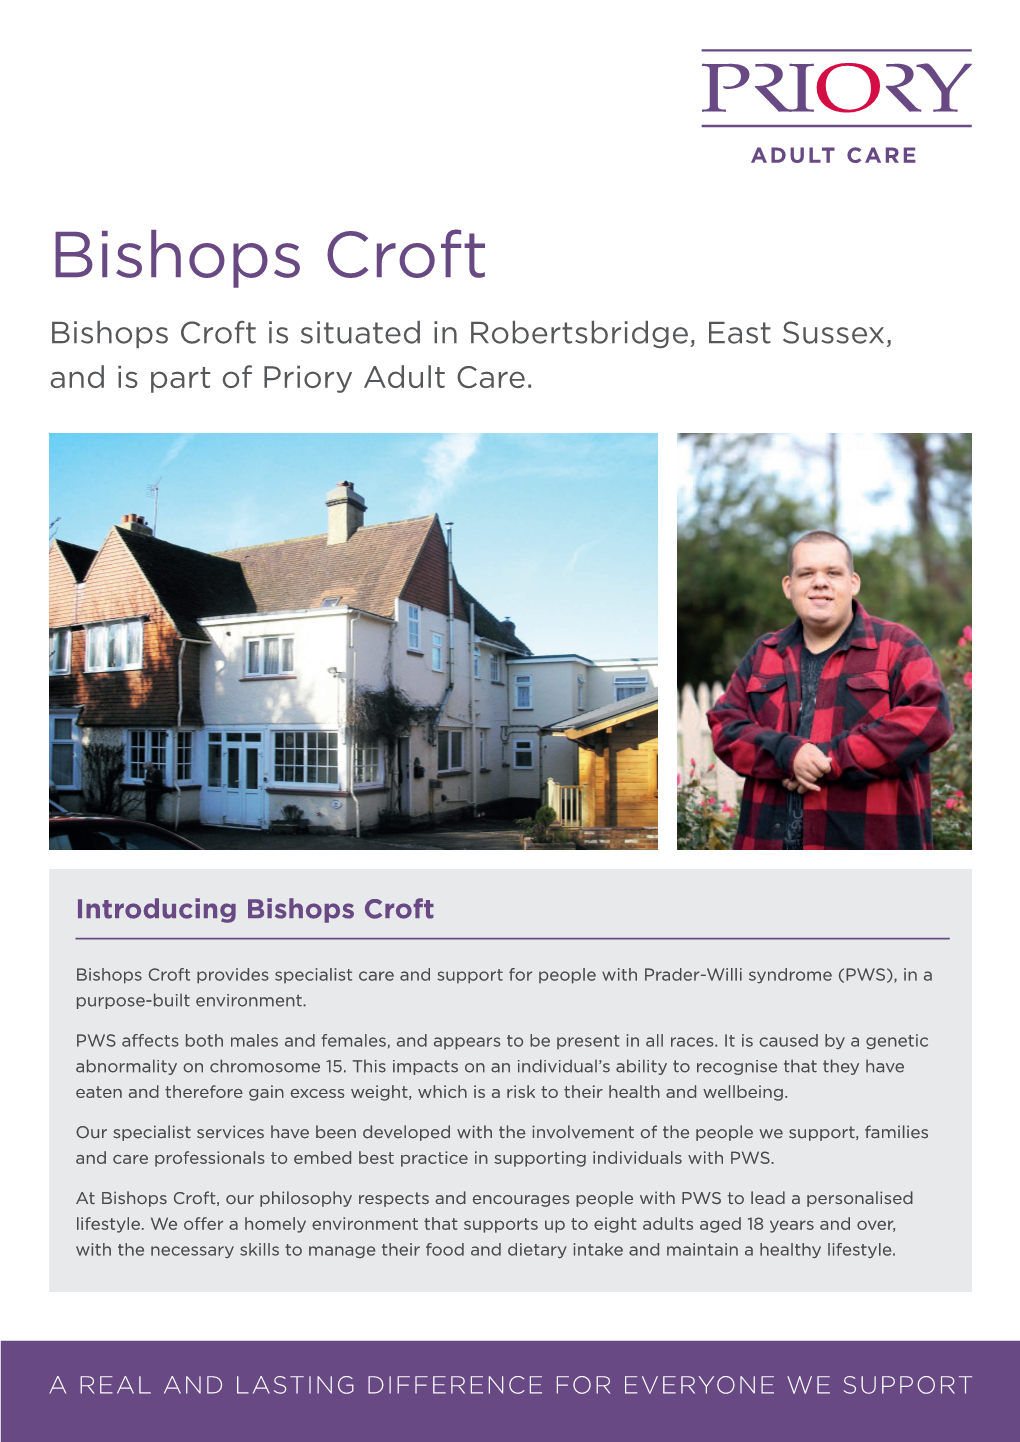 Bishops Croft Bishops Croft Is Situated in Robertsbridge, East Sussex, and Is Part of Priory Adult Care